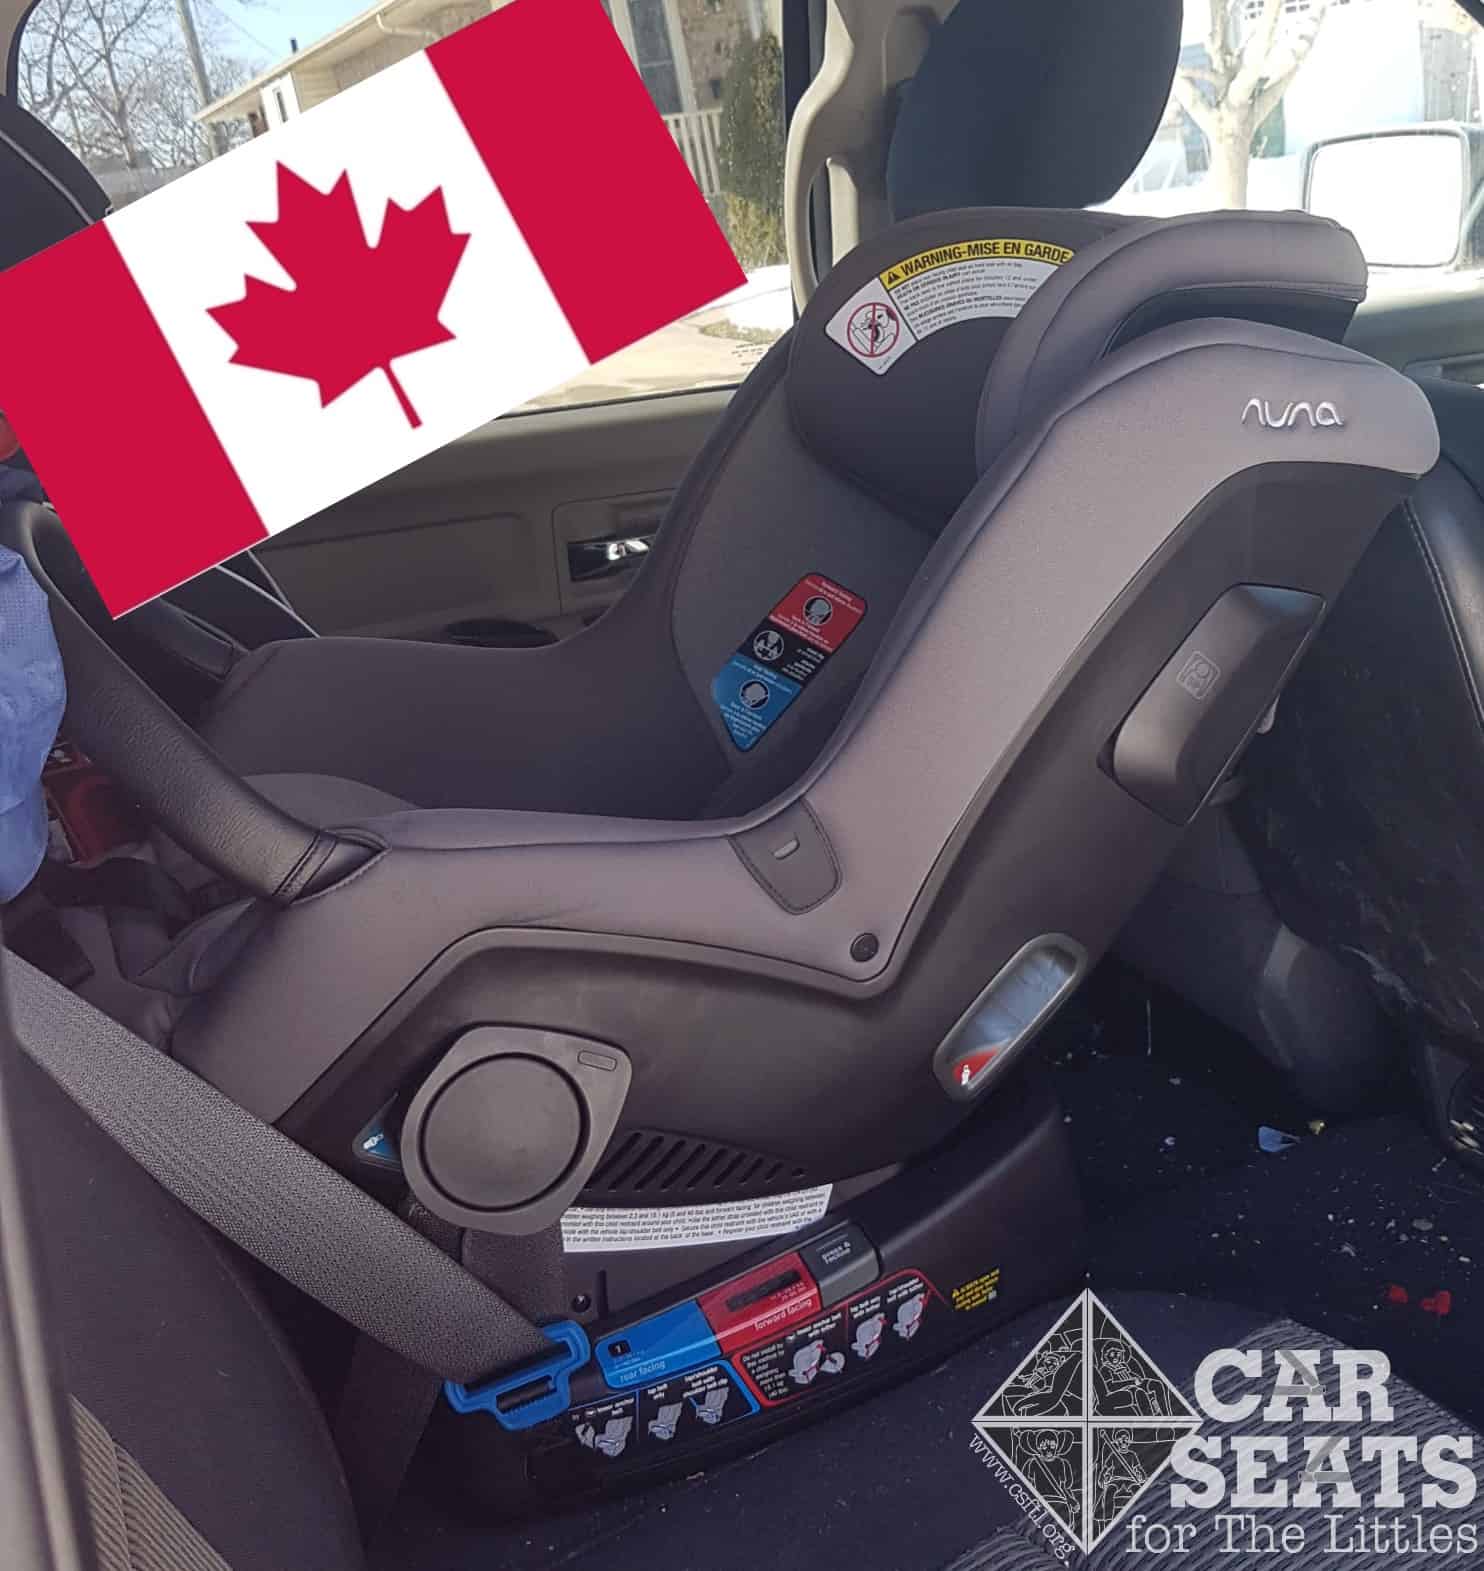 Nuna Rava Review Canada Car Seats For The Littles